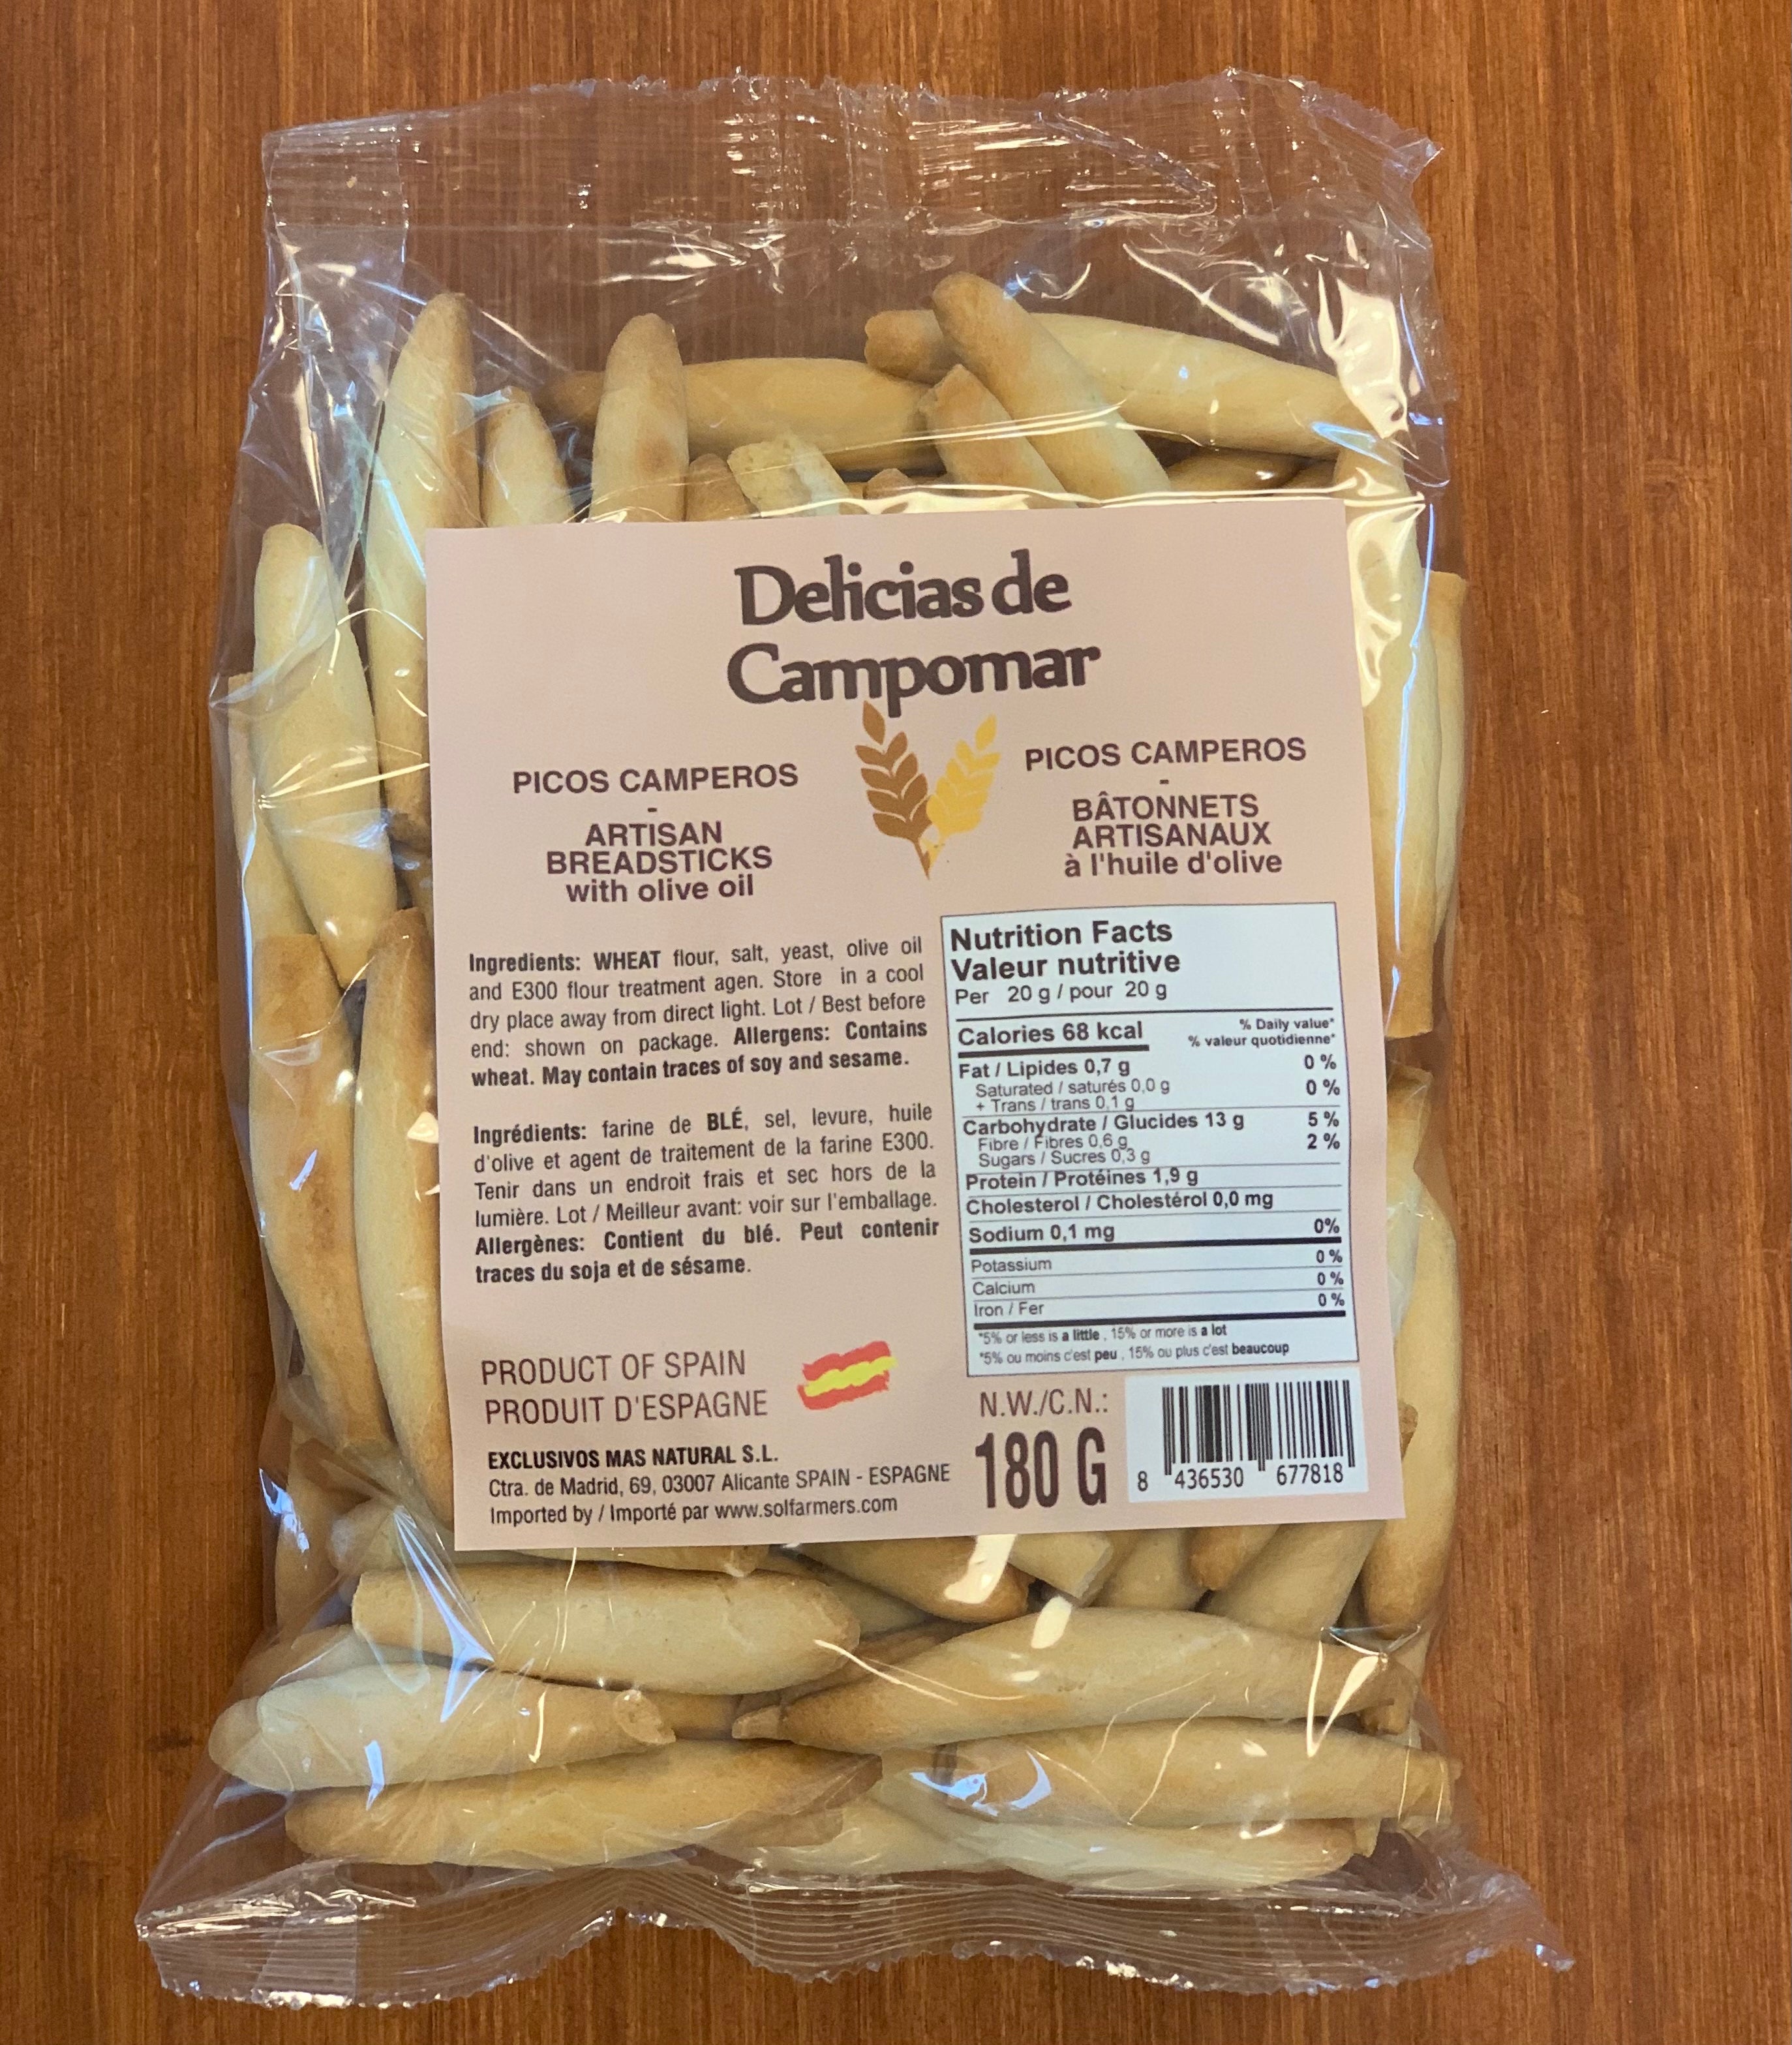 Artisan breadsticks with olive oil "picos camperos", 180 g